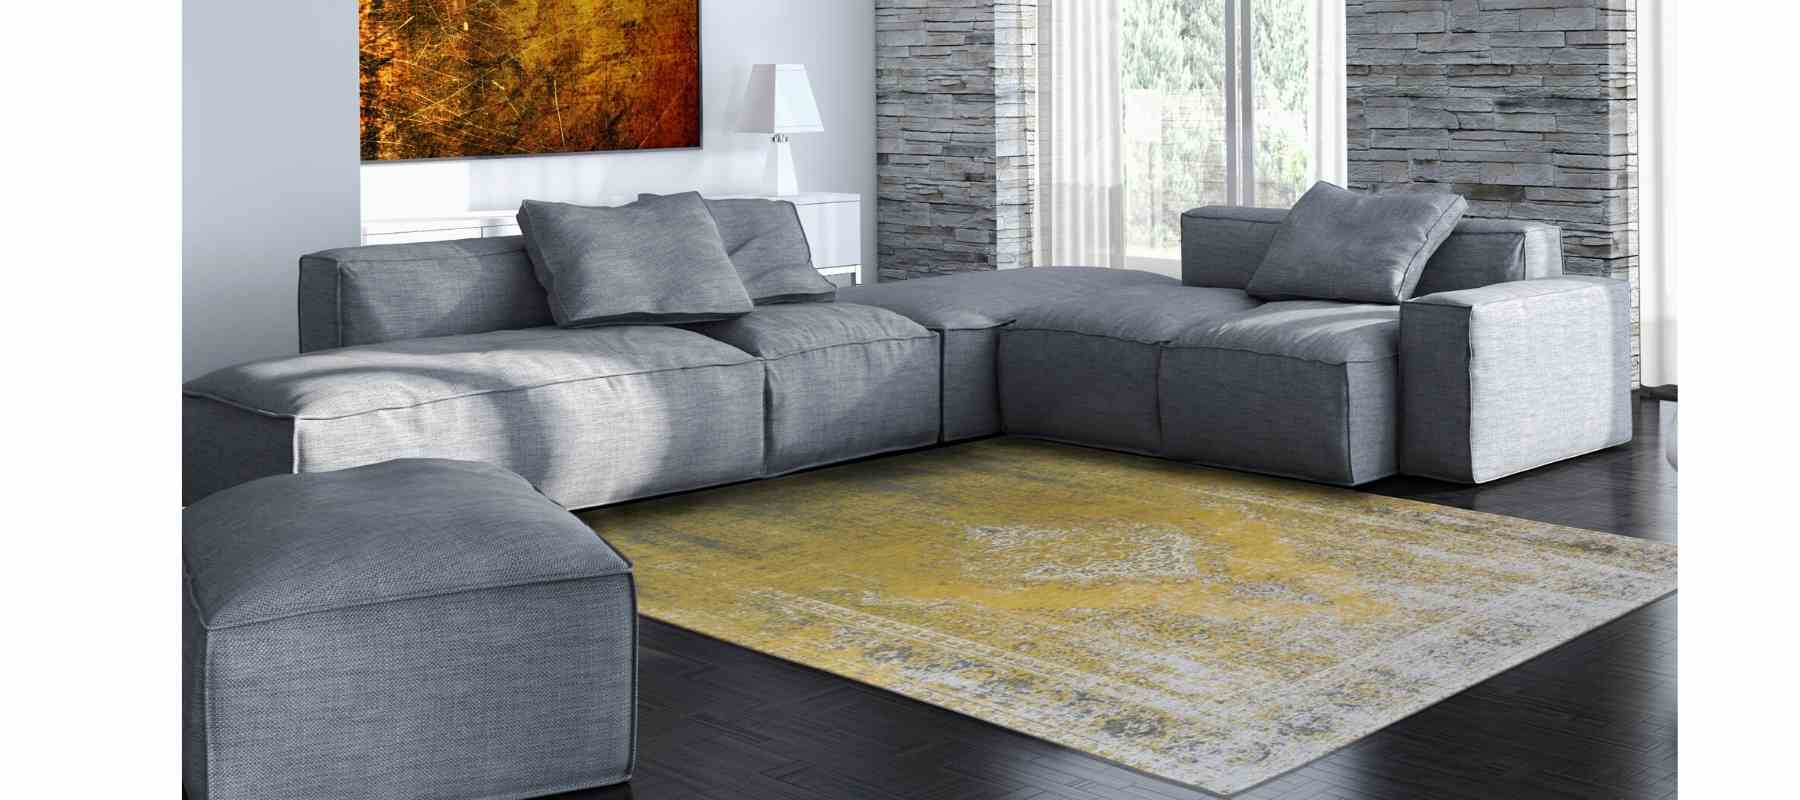 Living room with large yellow rug